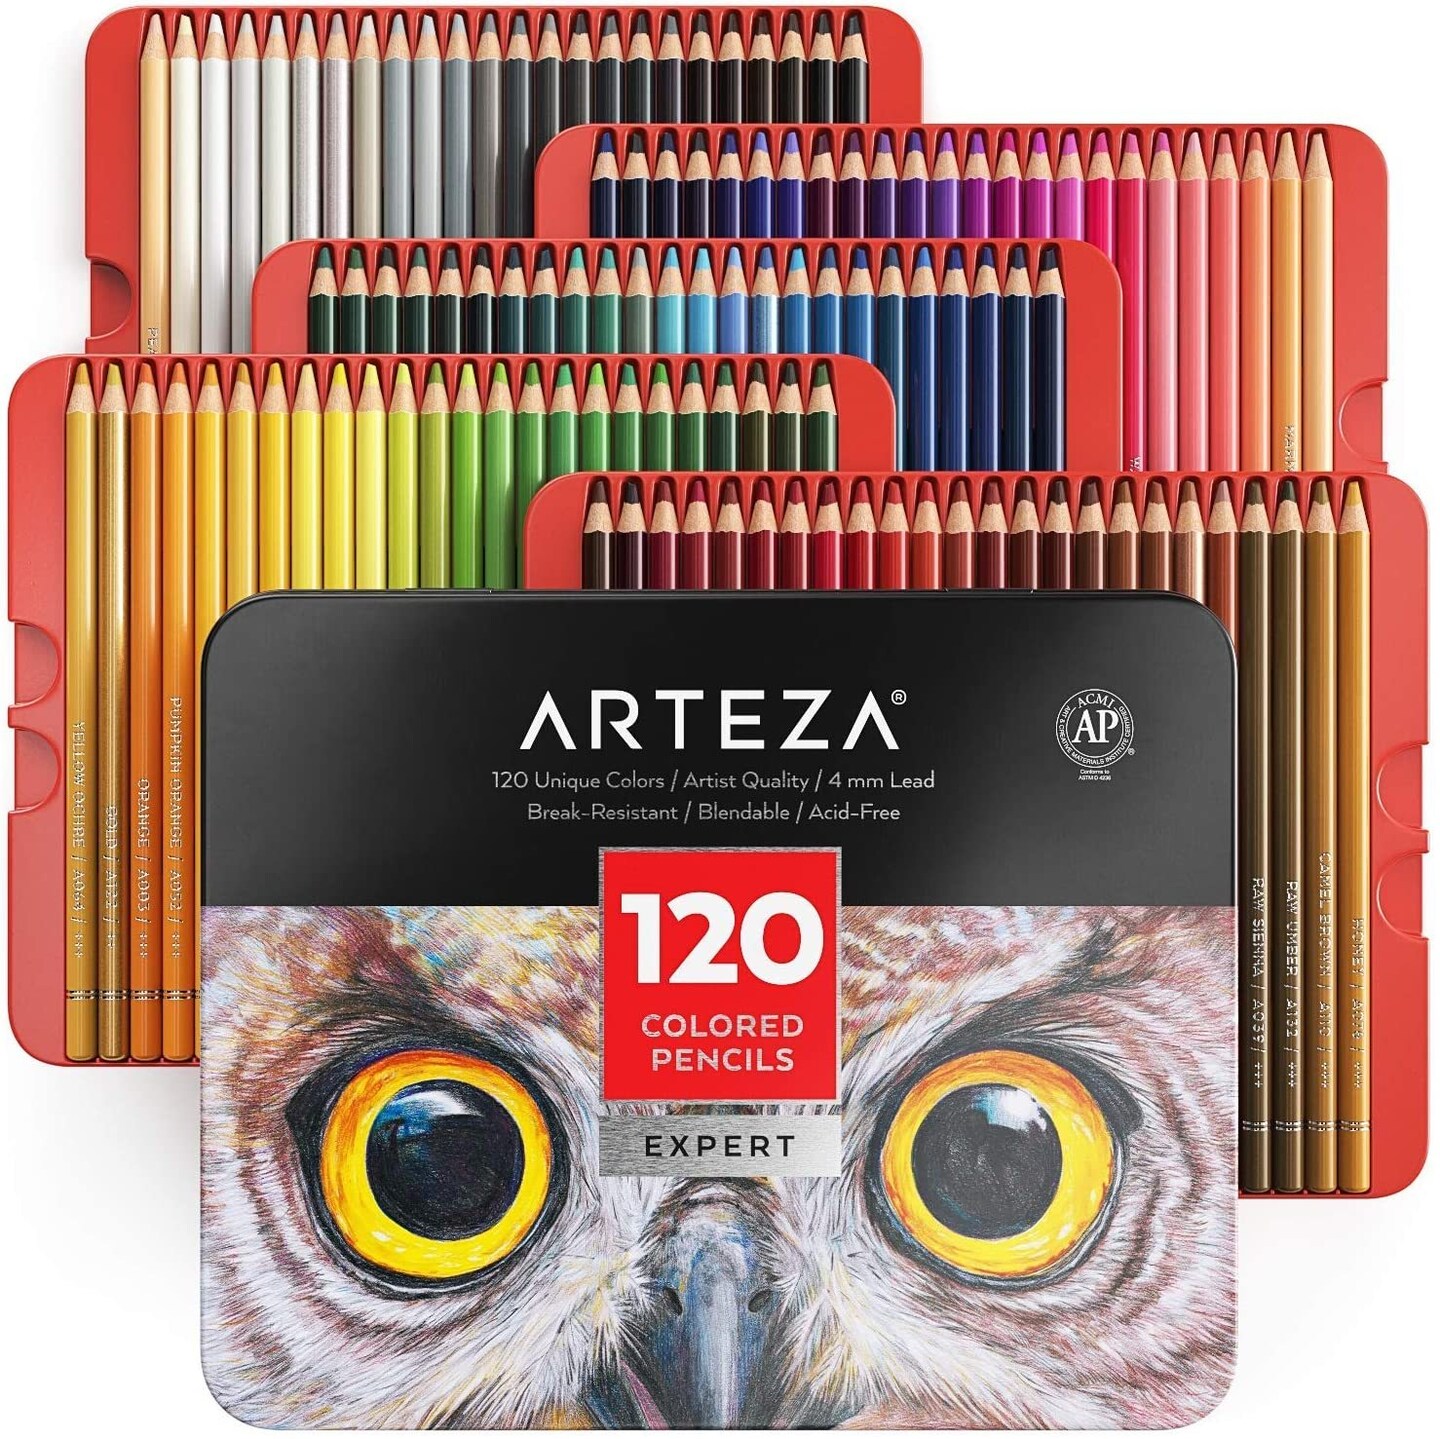 Arteza Professional Colored Pencils, Assorted Colors, Set for Adults  Artists - 120 Pack